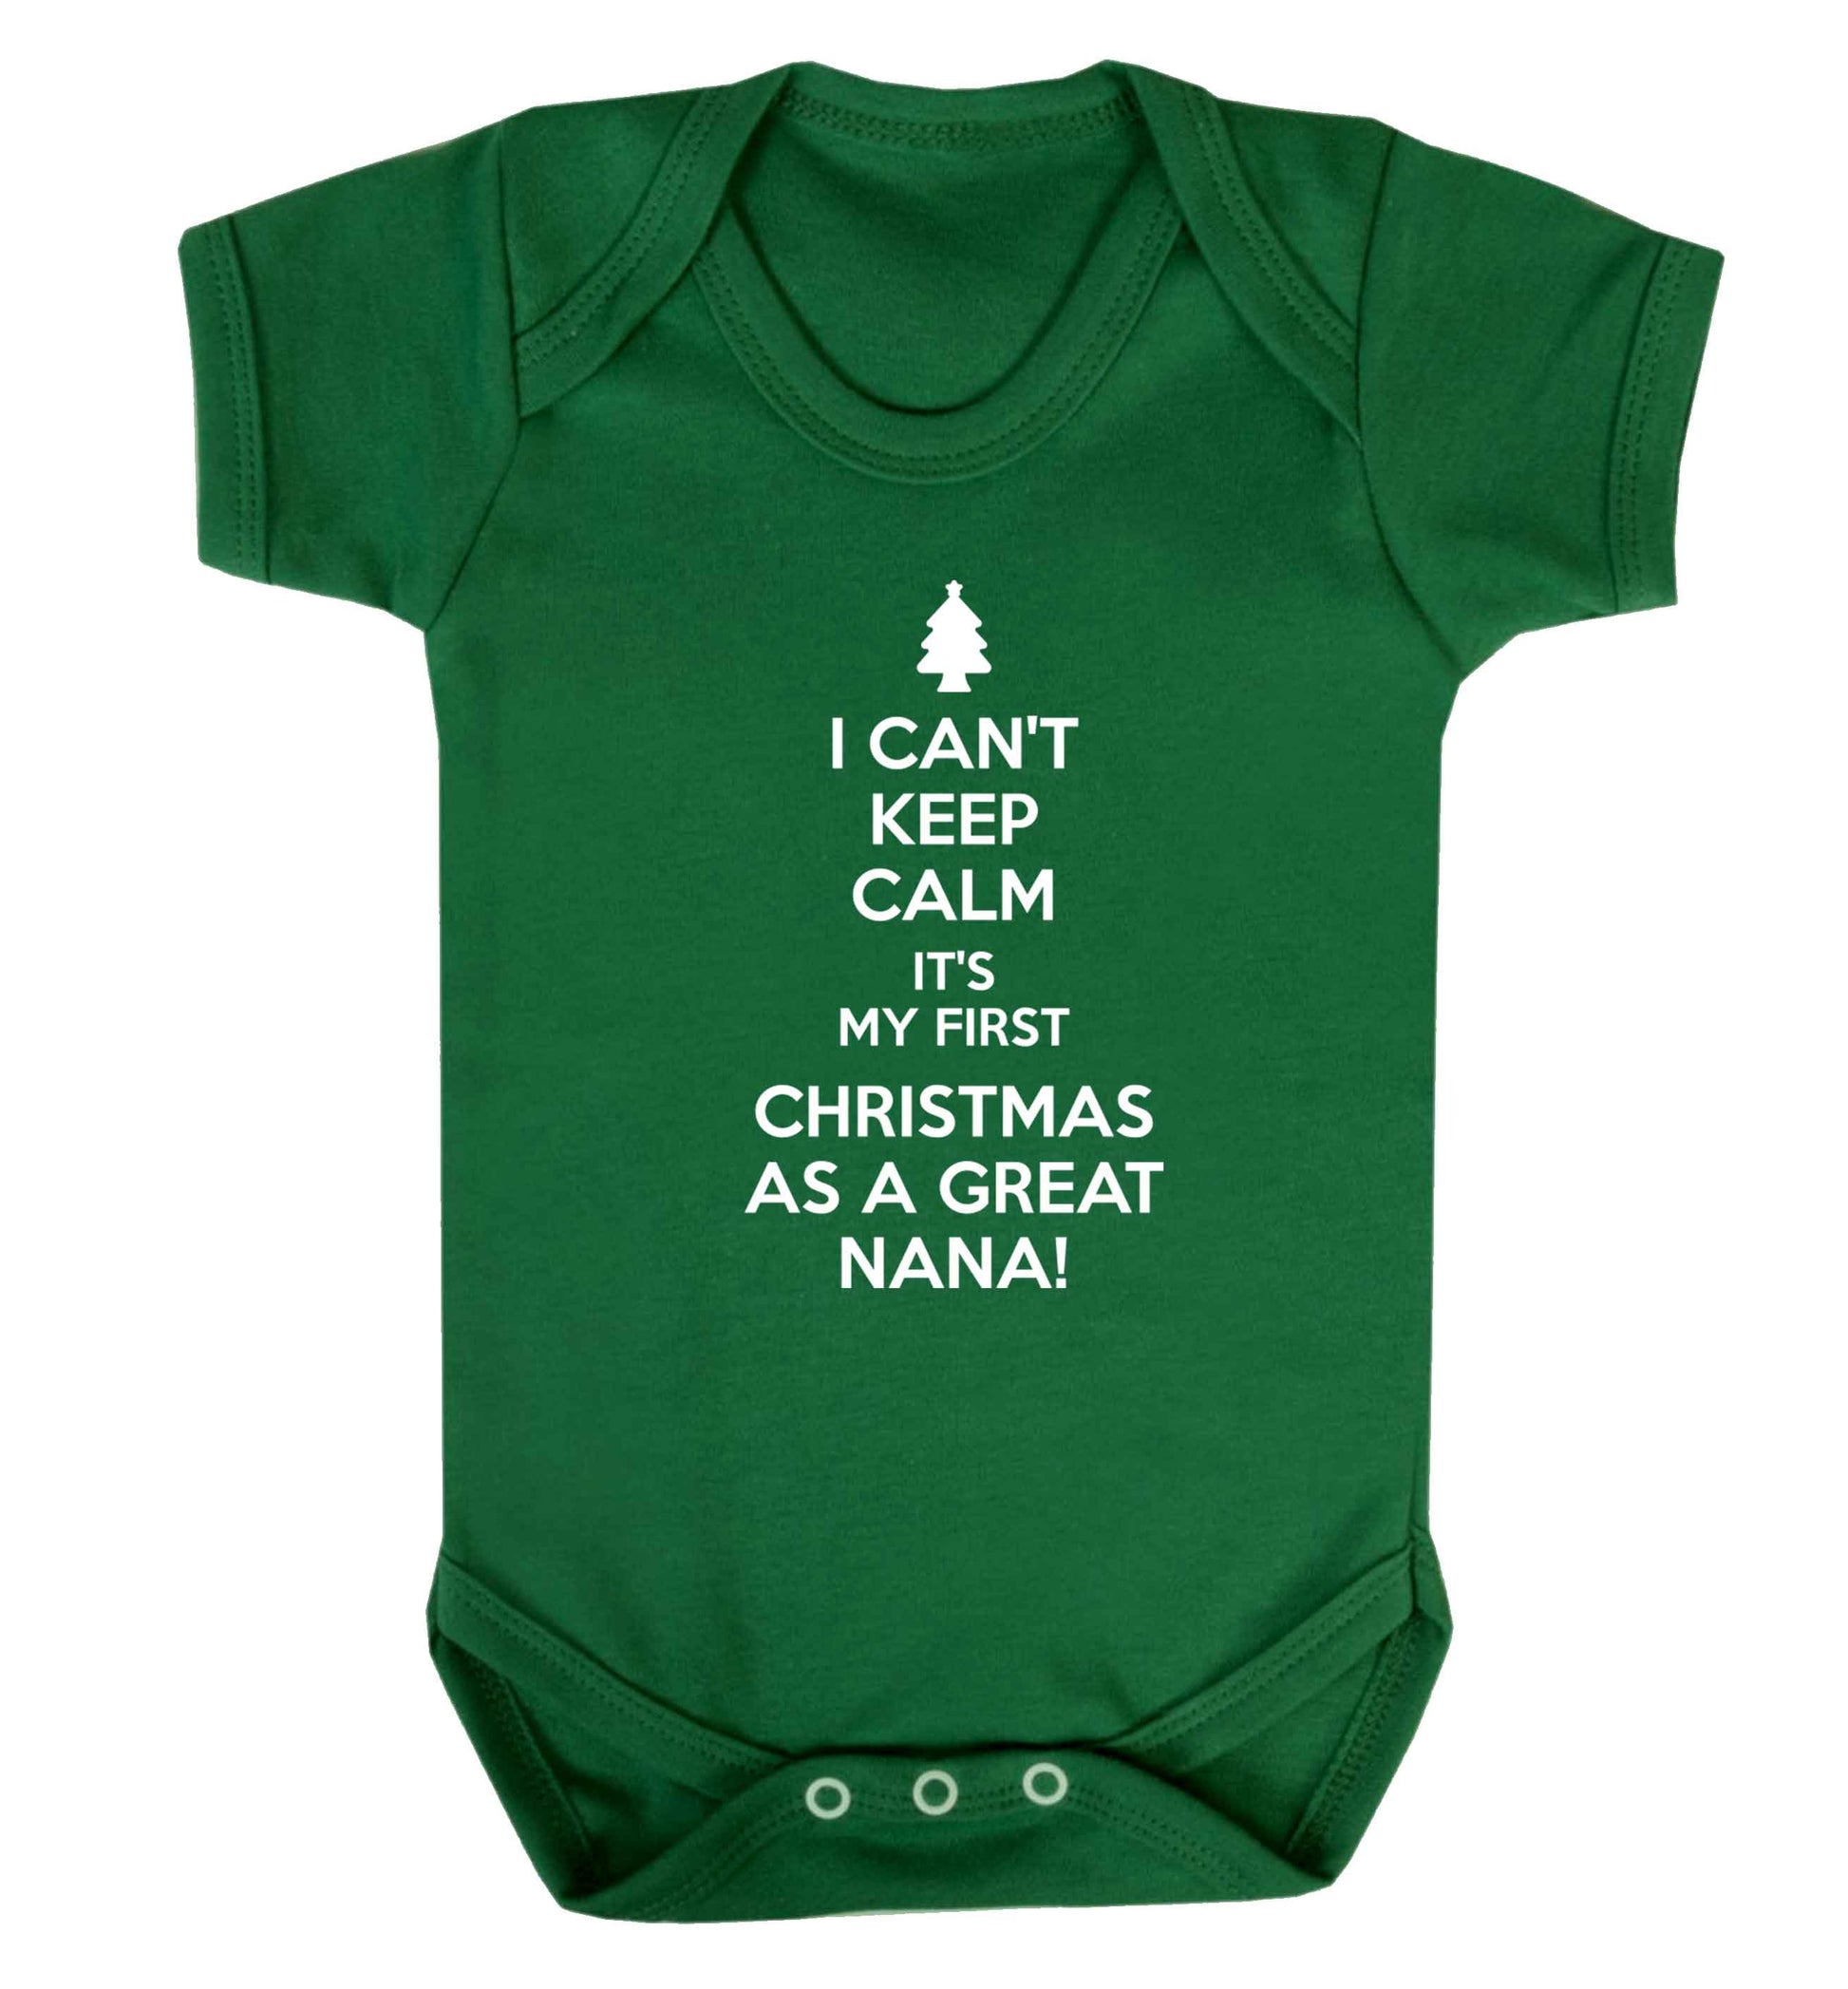 I can't keep calm it's my first Christmas as a great nana! Baby Vest green 18-24 months